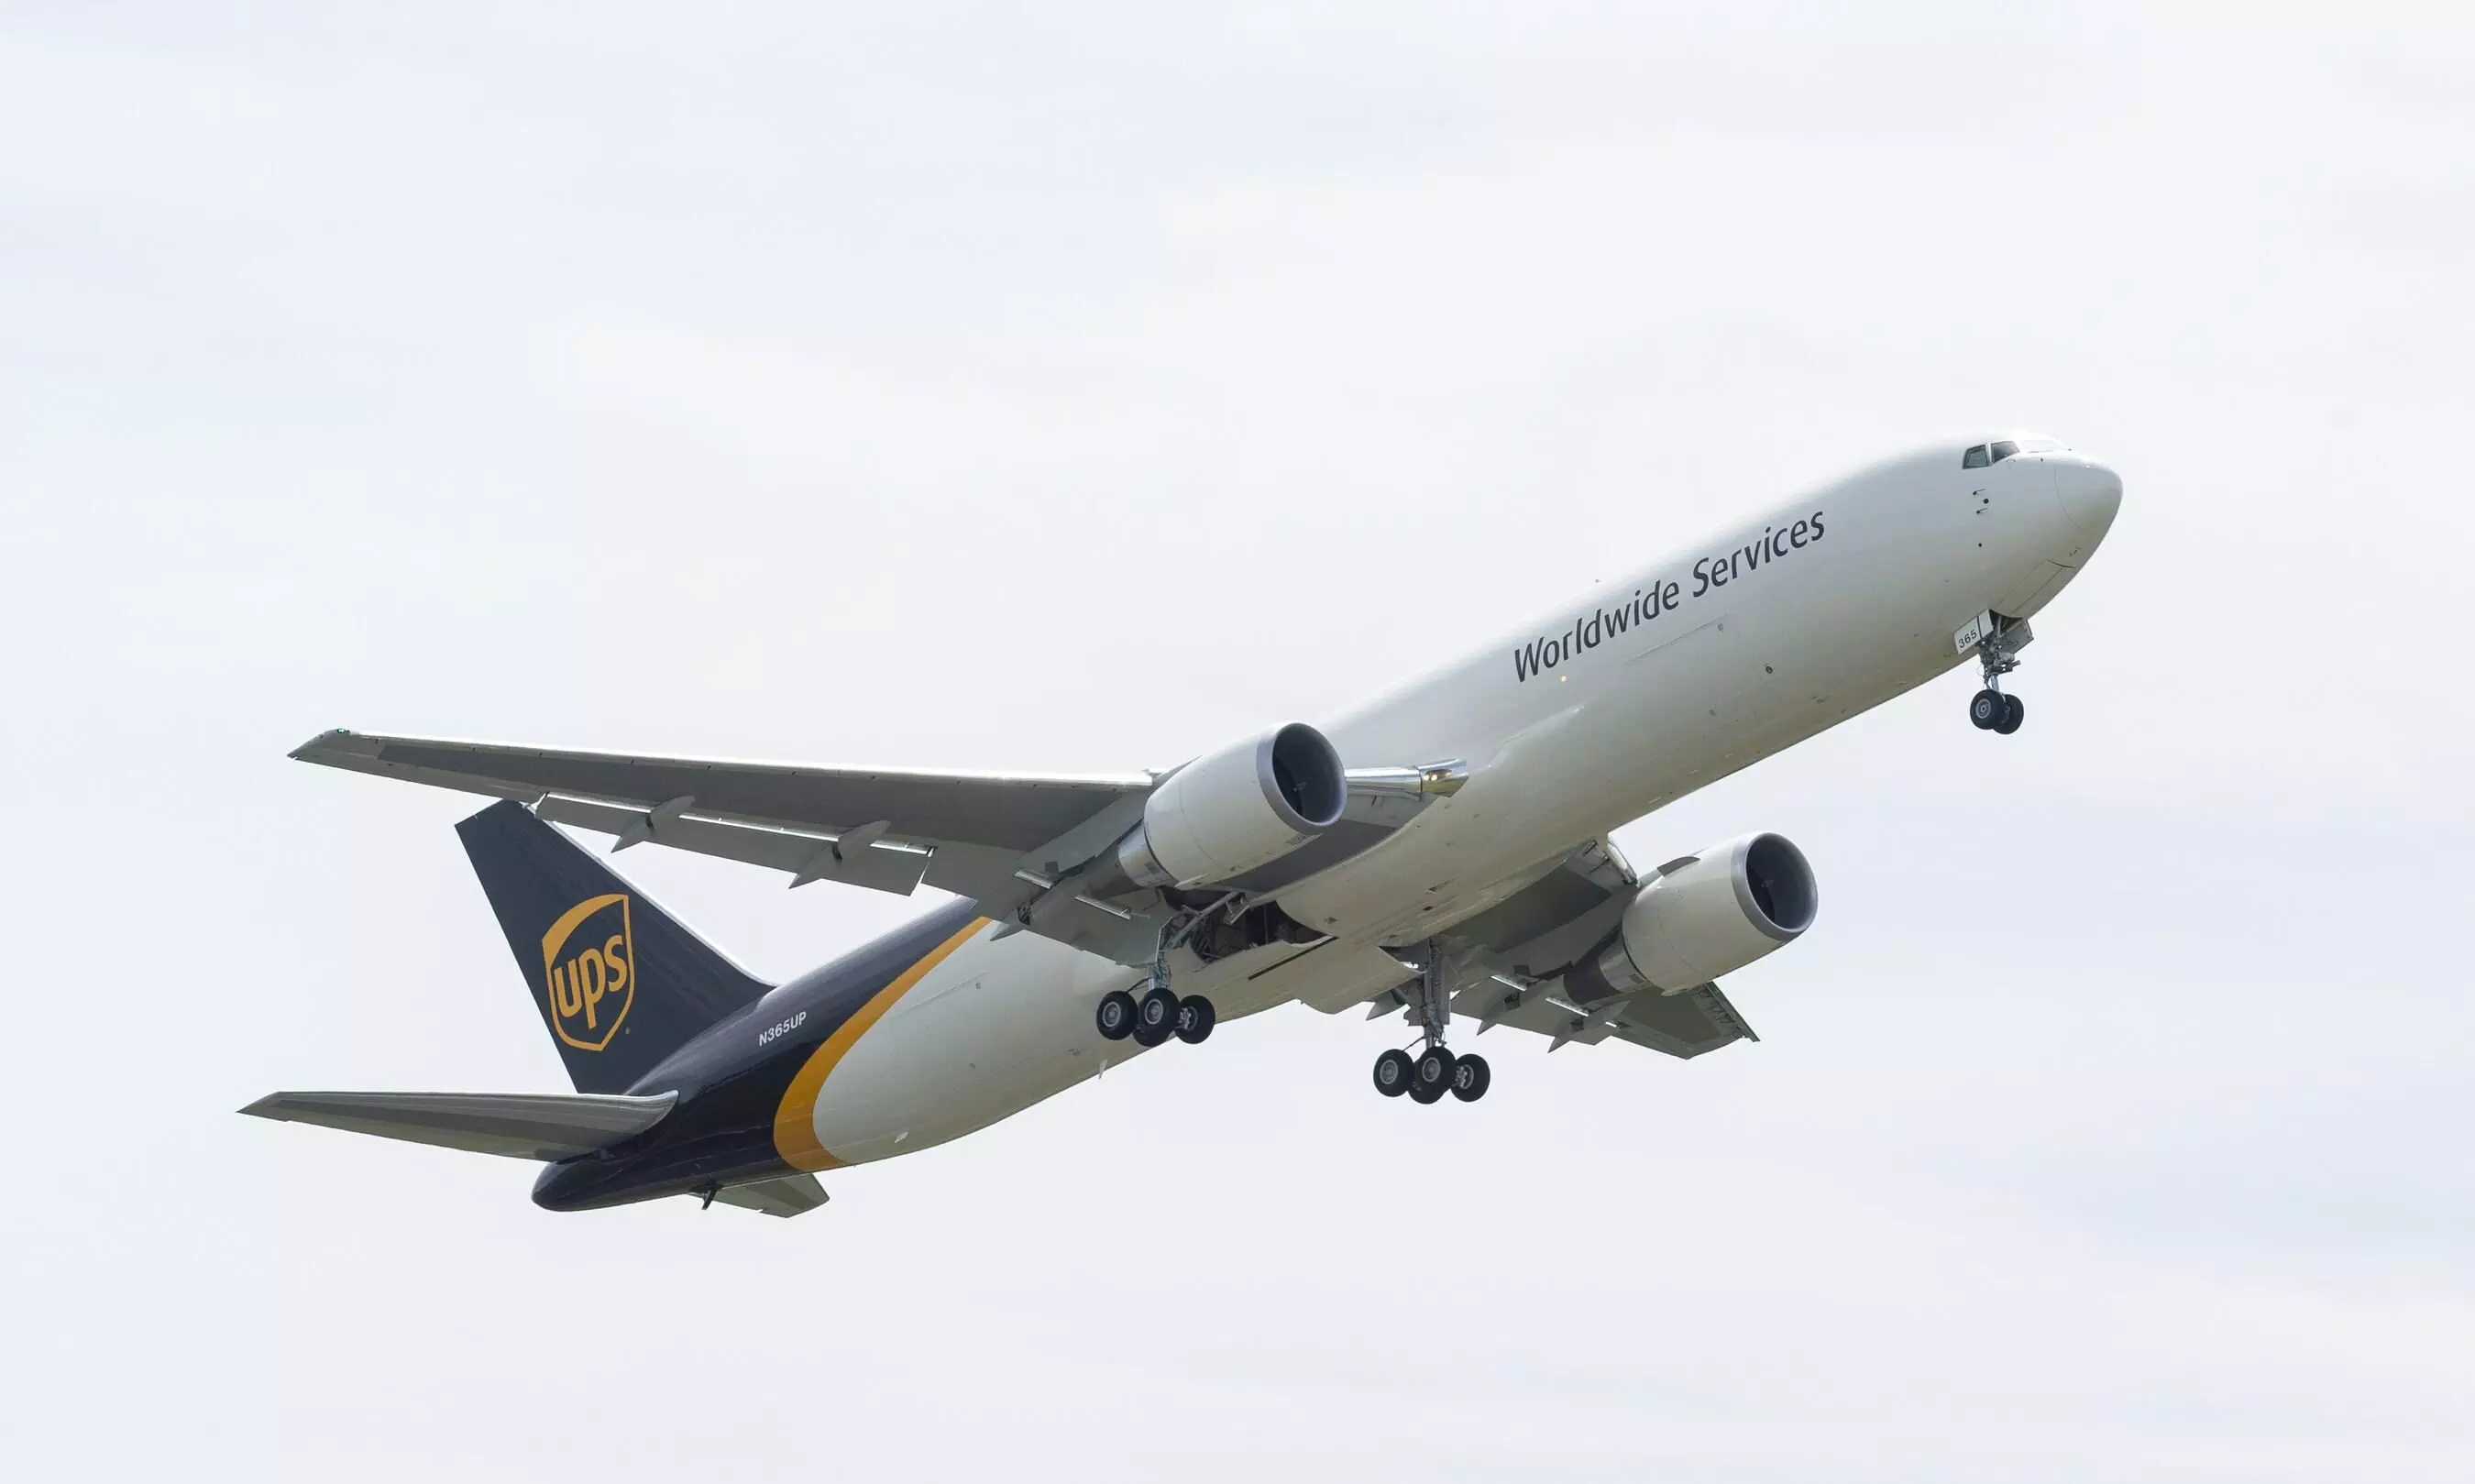 Boeing announces UPS purchase of 8 additional 767s